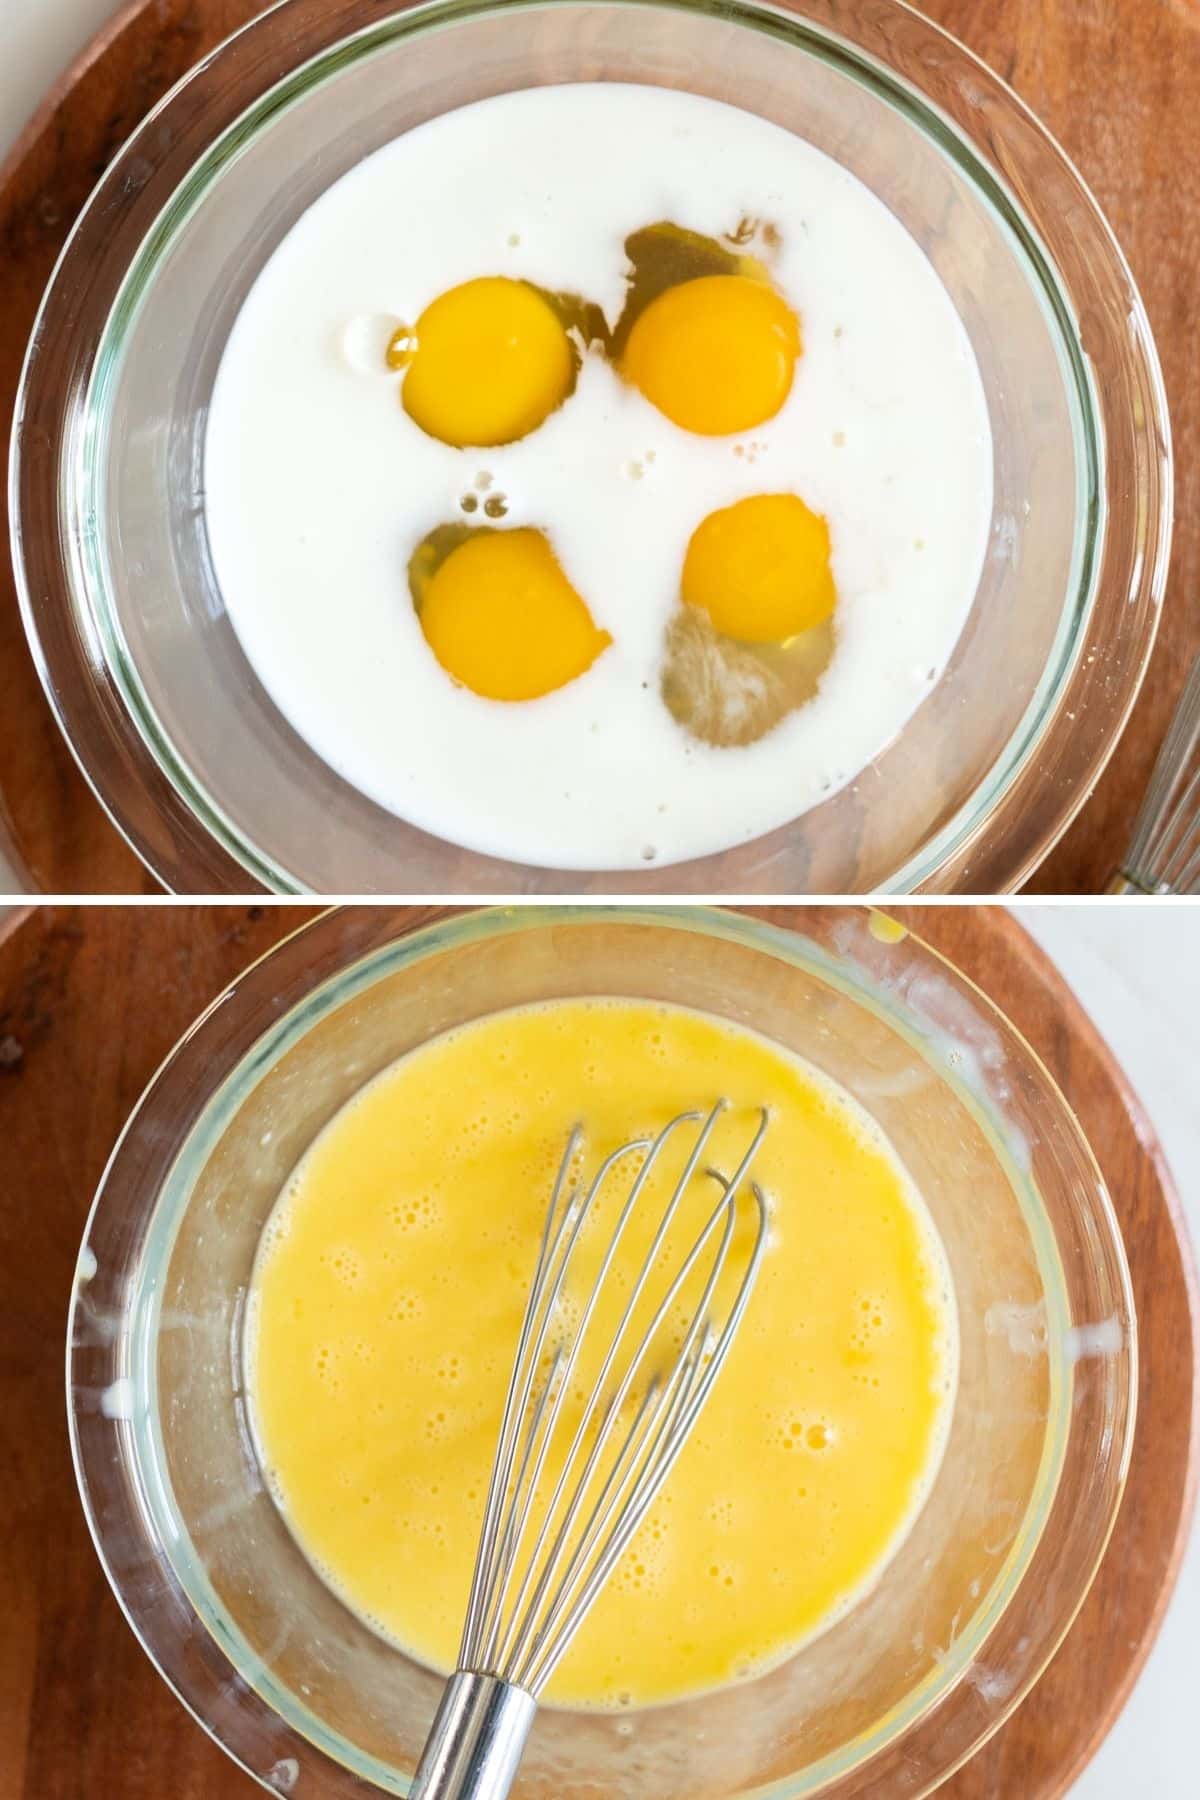 Whisking eggs and milk in a bowl.